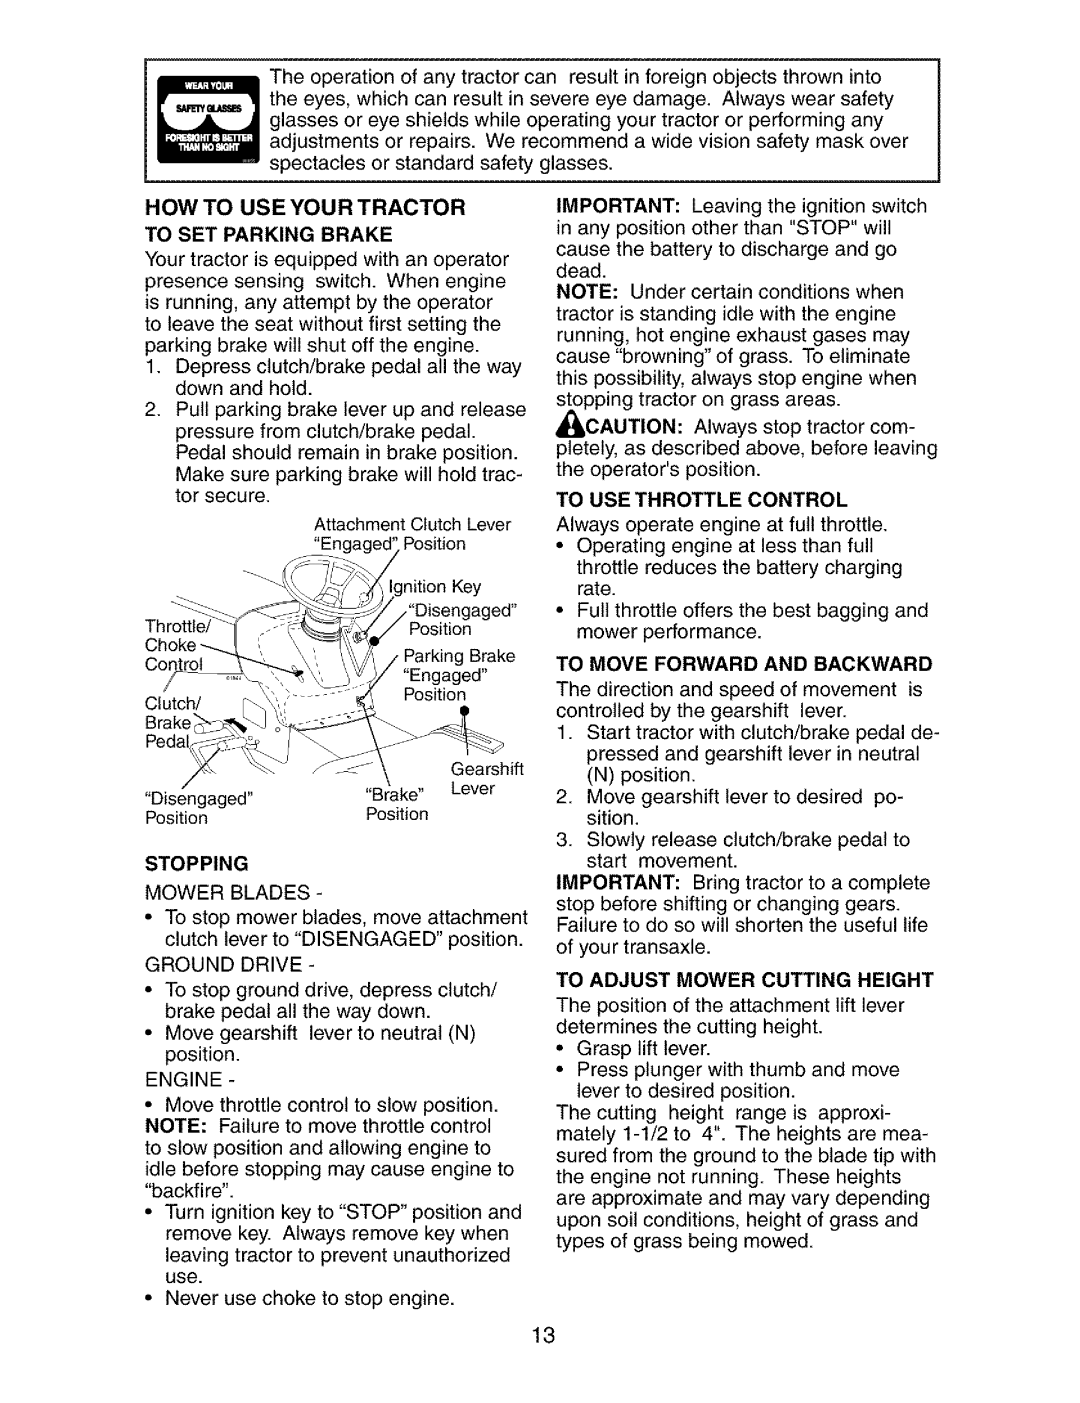 Craftsman 917.27339 owner manual HOW to USE Your Tractor To SET Parking Brake, To USE Throttle Control 